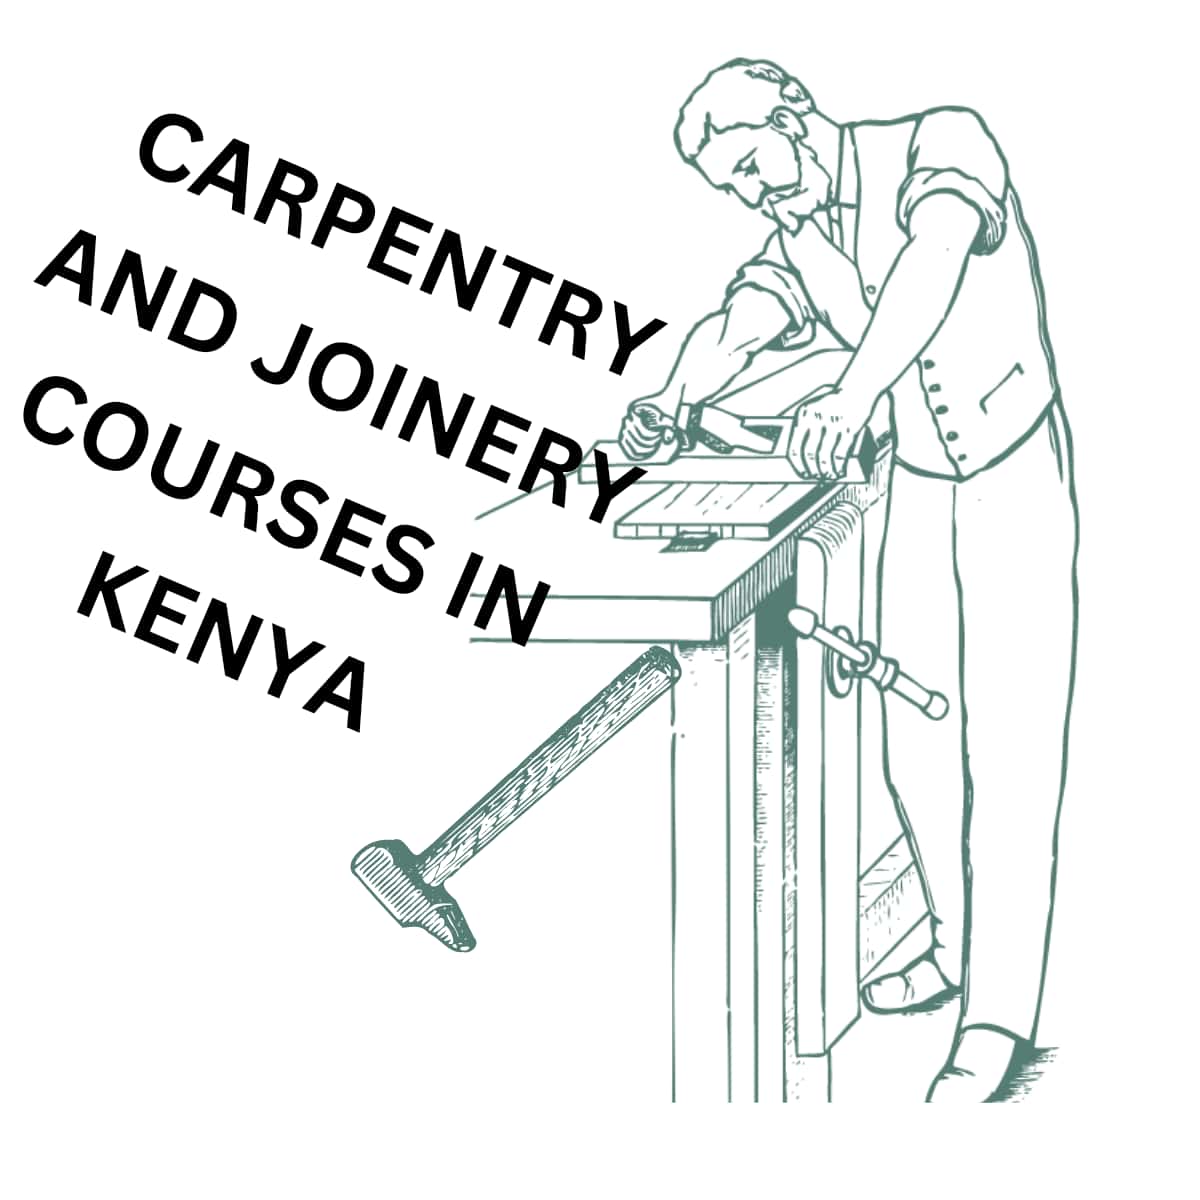 Carpentry and joinery courses in Kenya